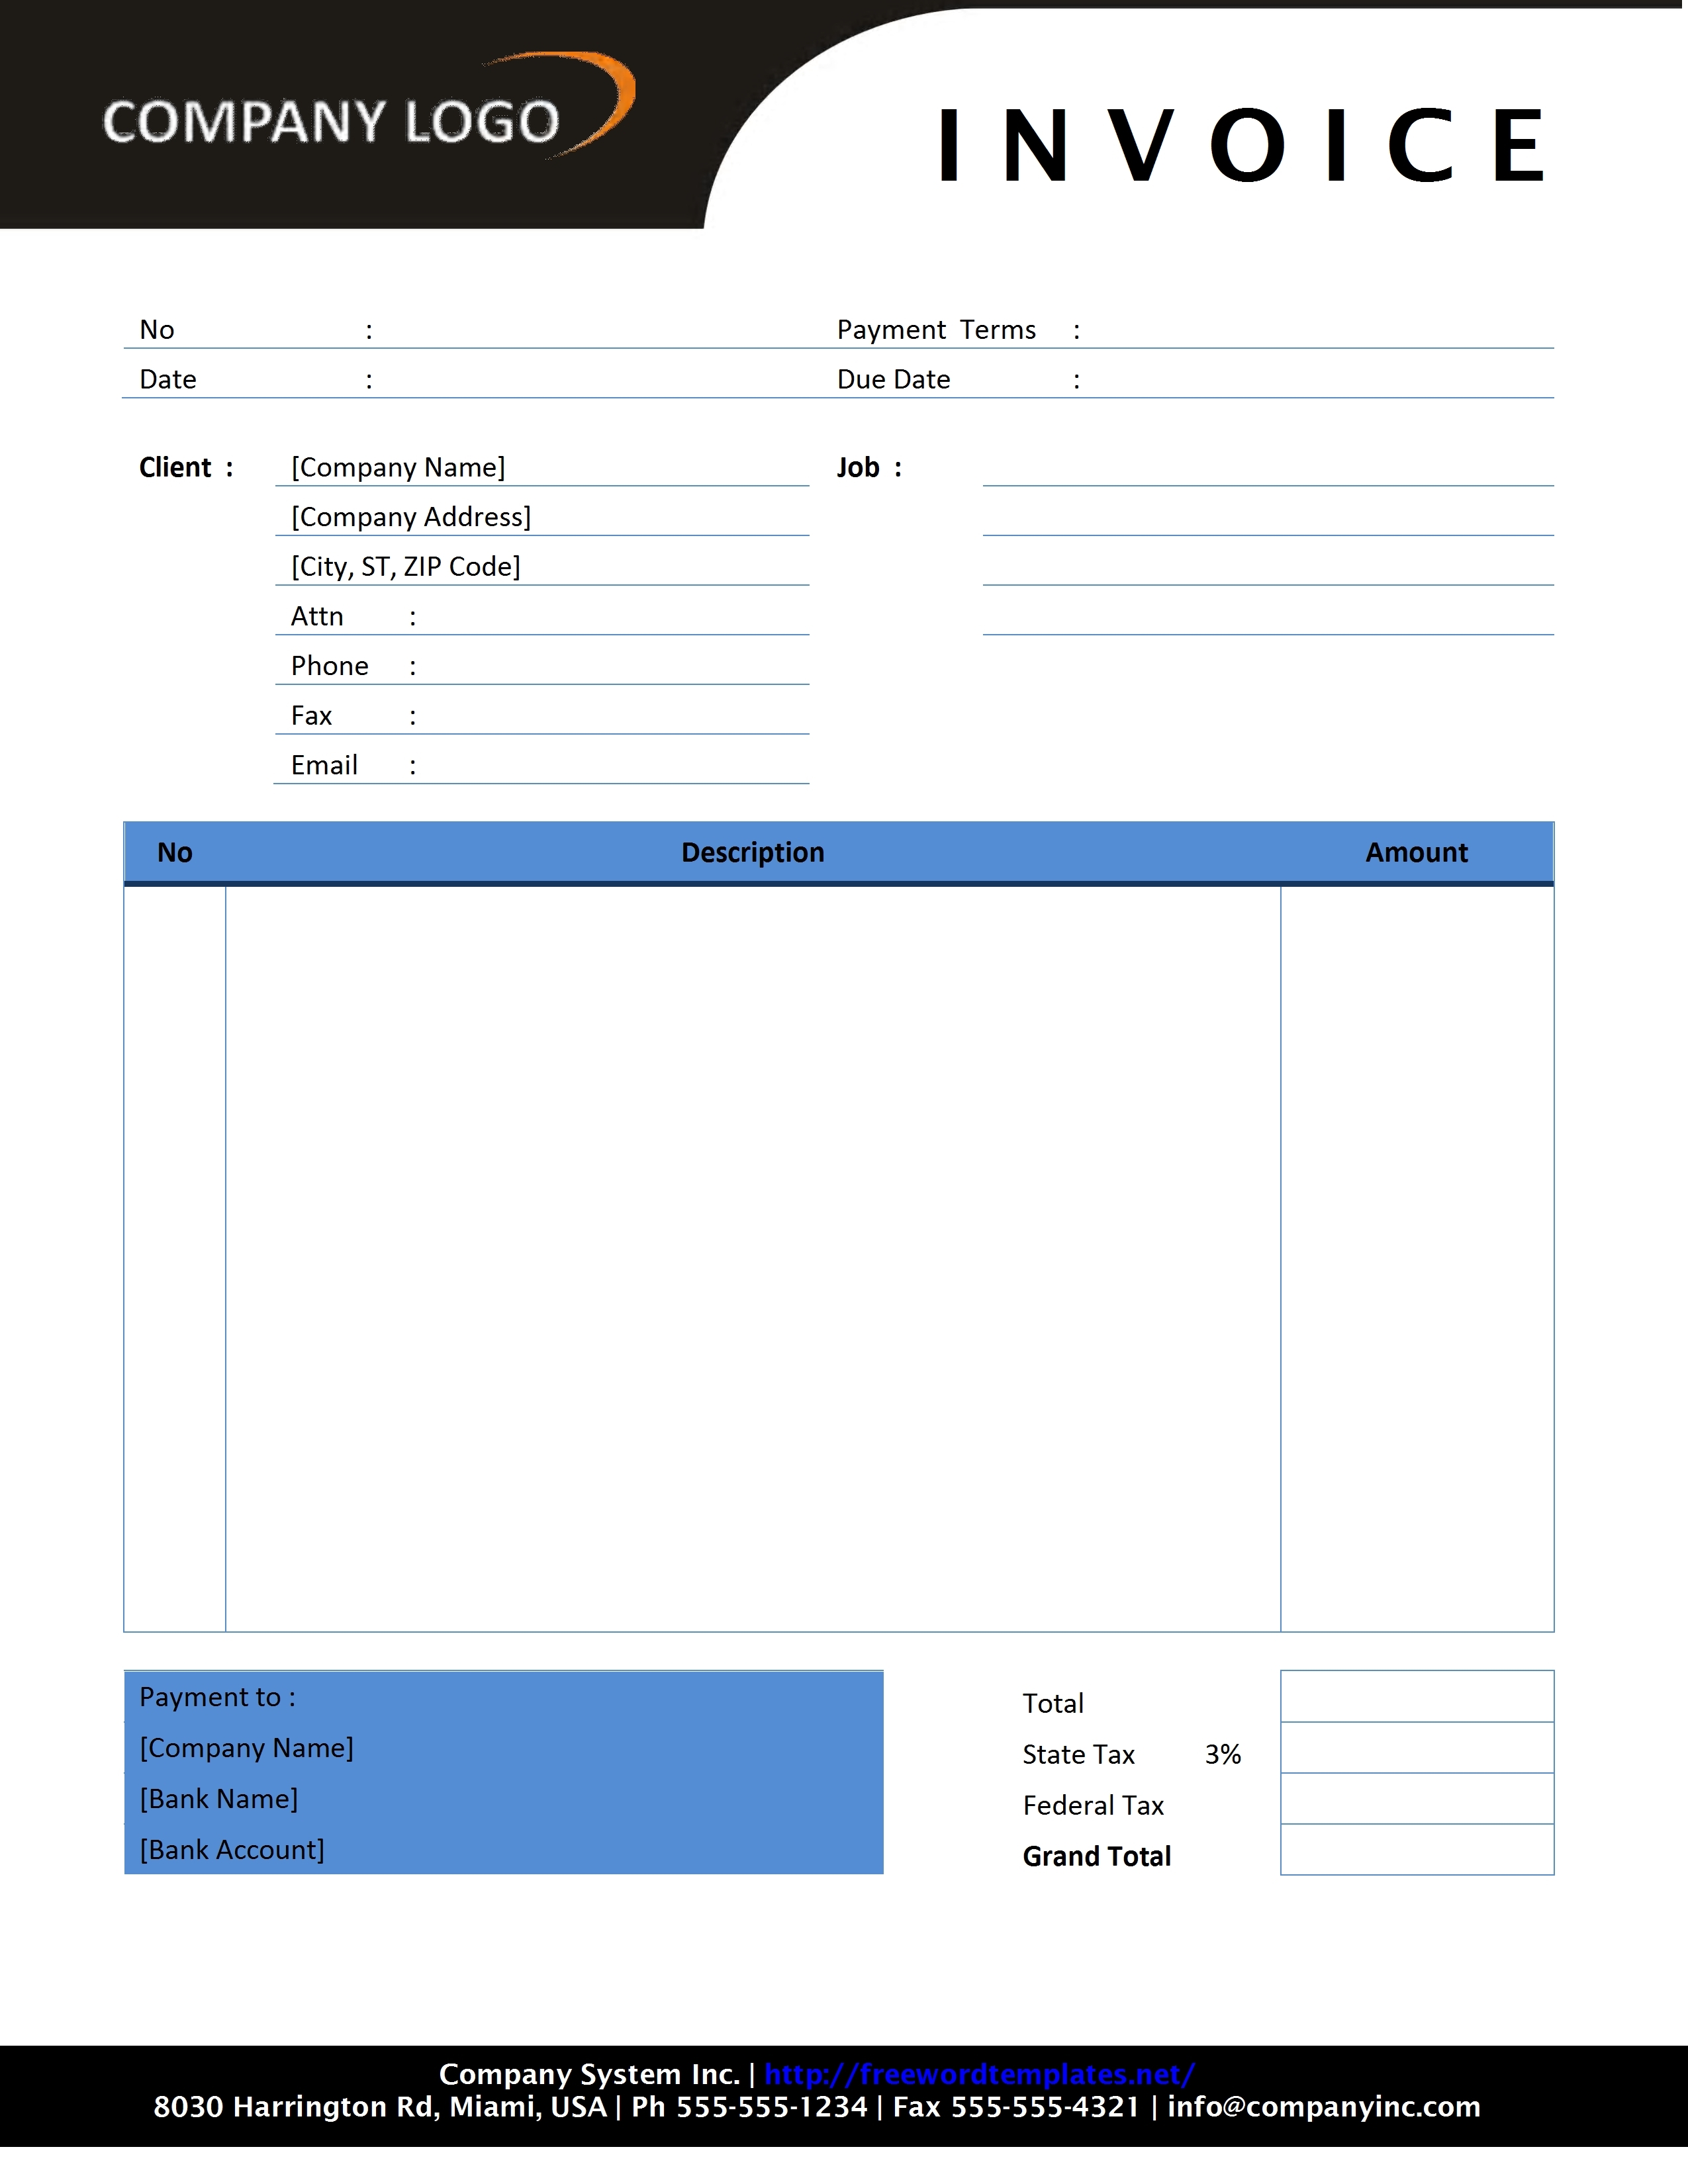 microsoft word invoice template download best business template free microsoft word invoice template